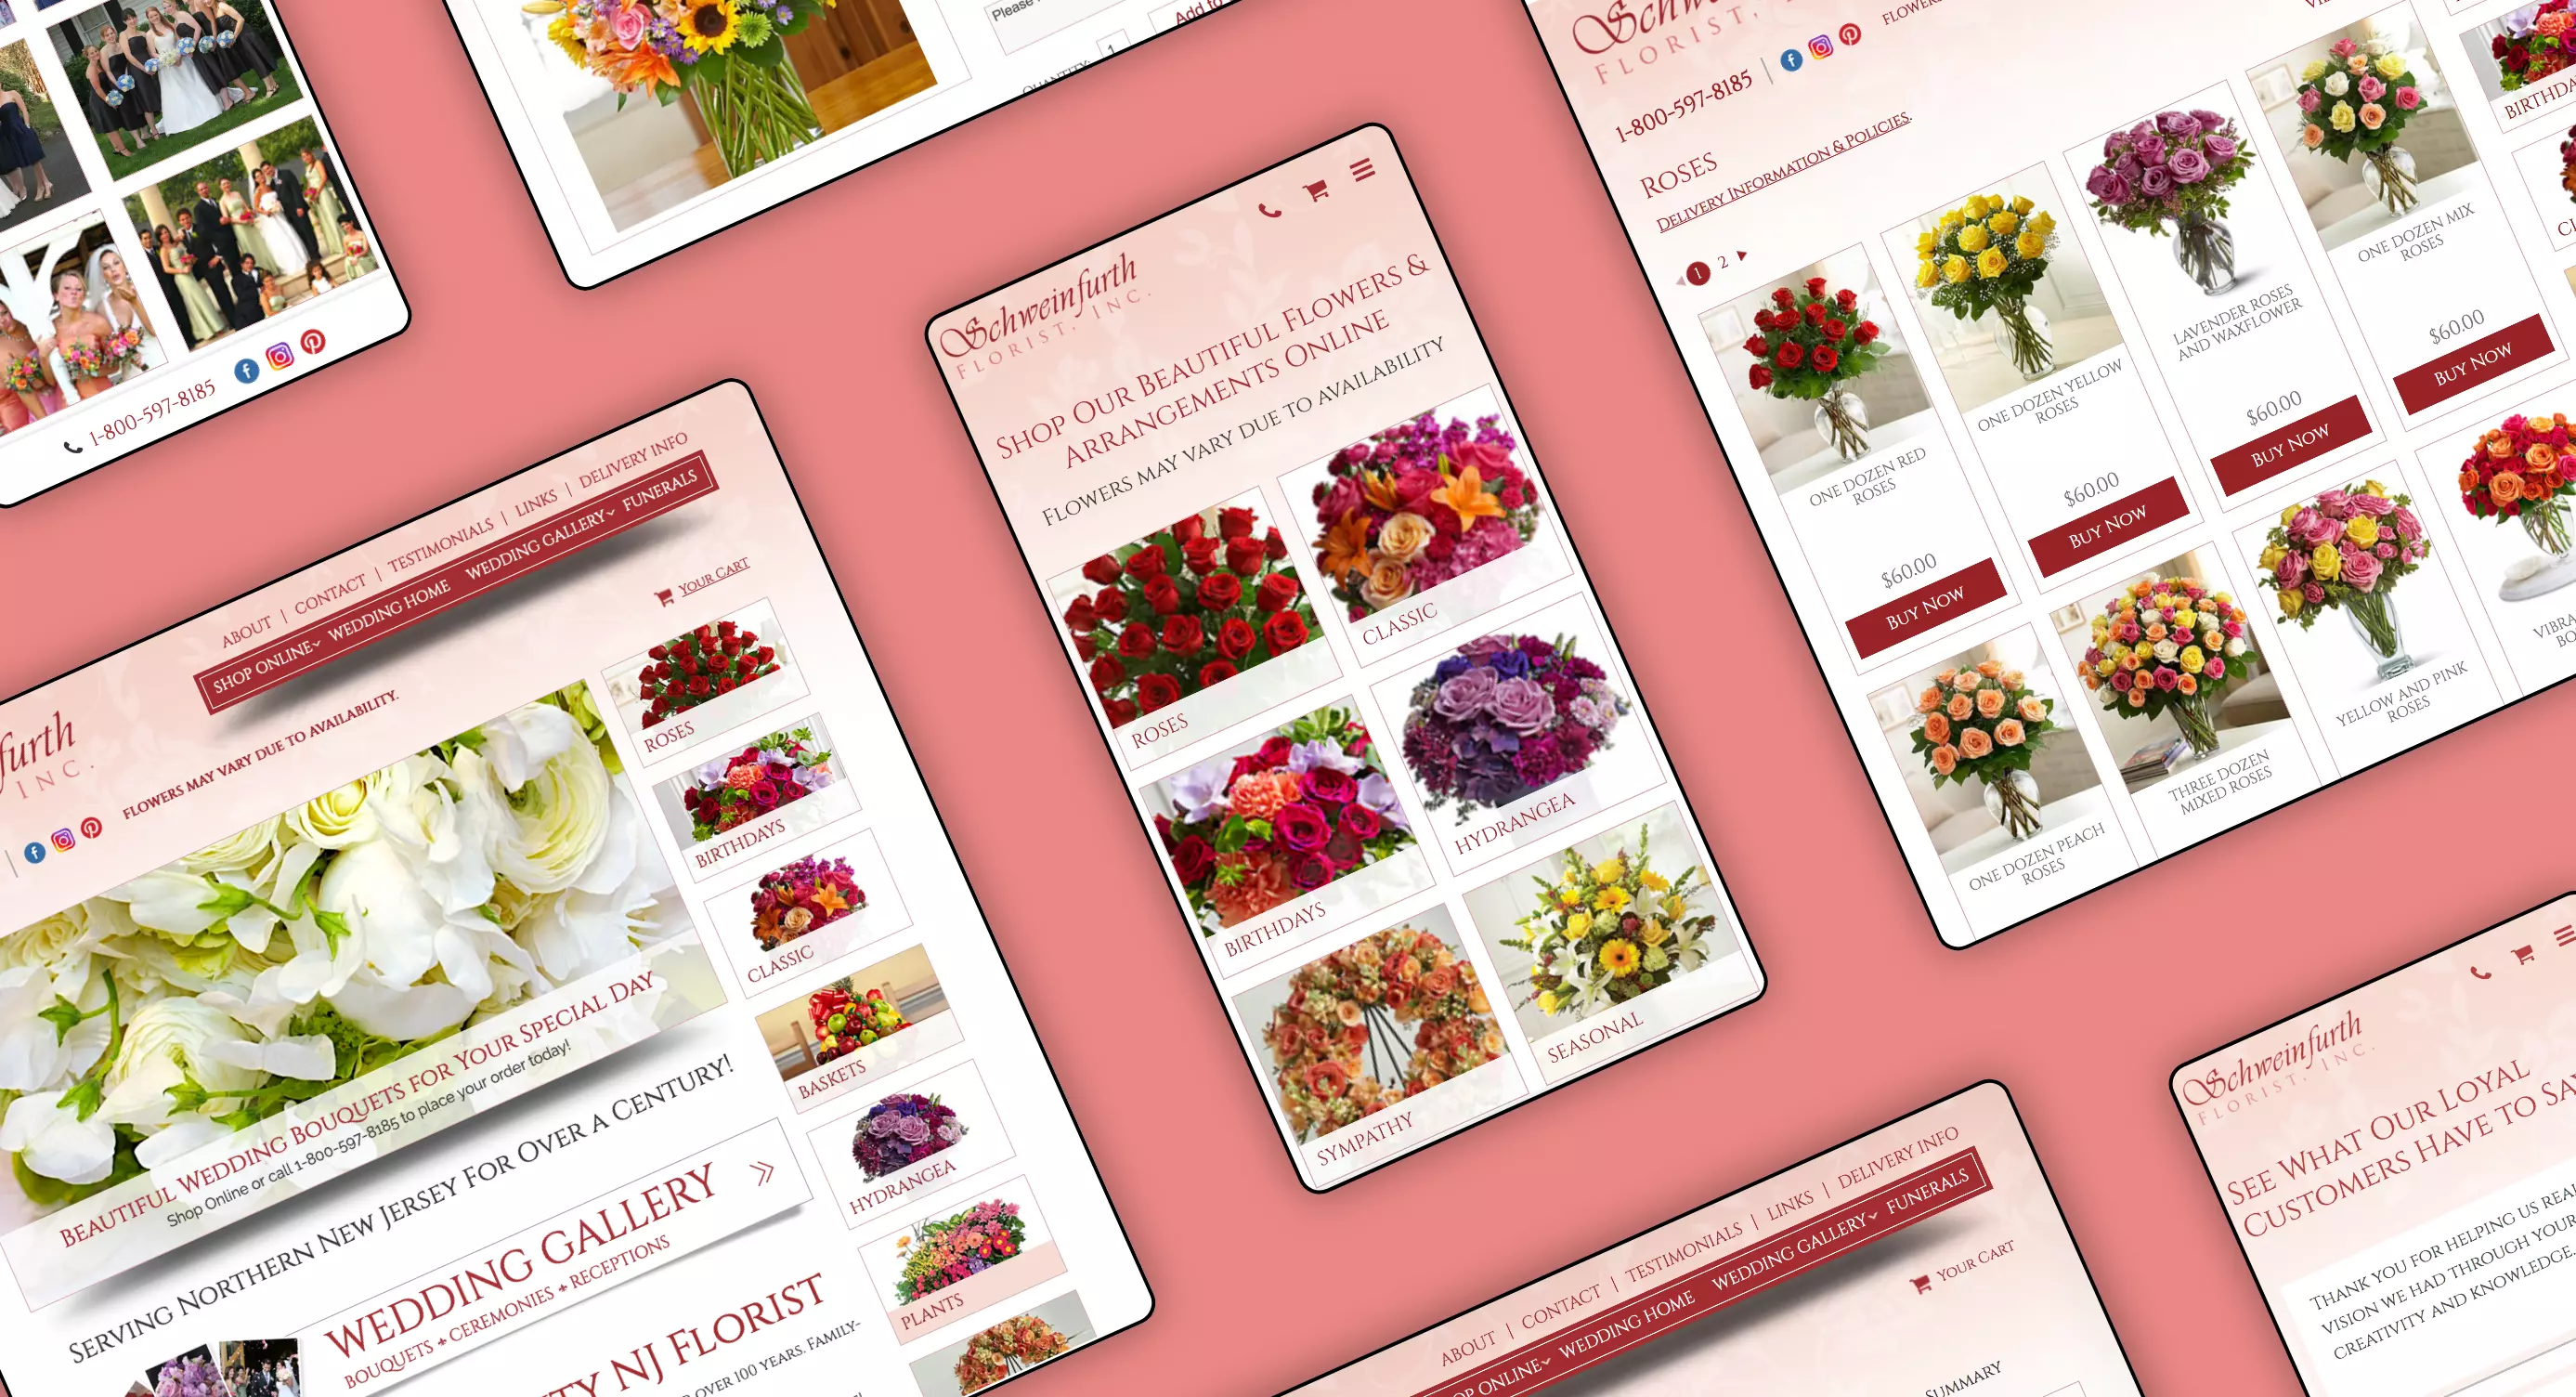 Schweinfurth, an online and storefront florist in Midland Park, New Jersey